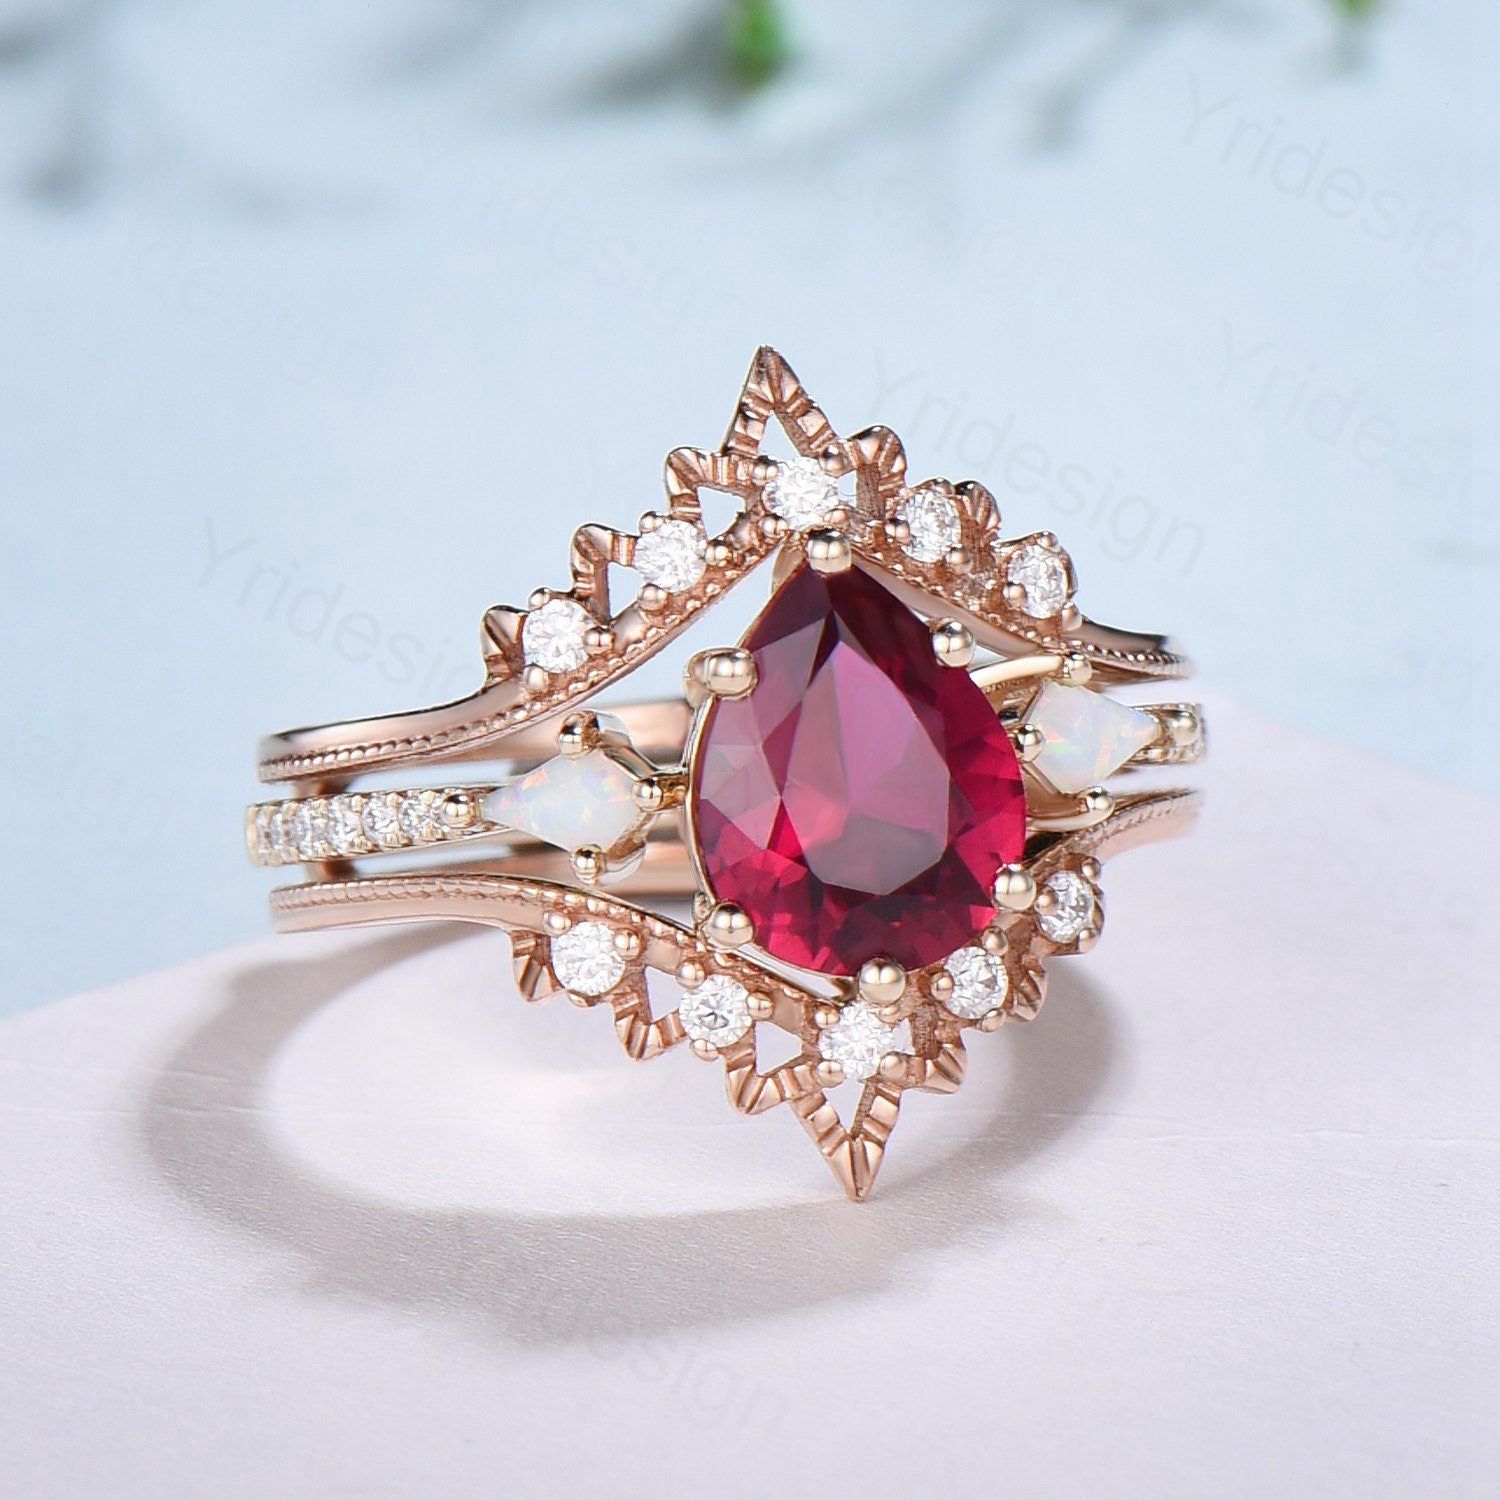 Vintage Ruby Opal Engagement Ring Set Crown Moissanite Ruby Bridal Wedding ring Set Art Deco Anniversary Gift Unique Promise Ring For Women - PENFINE